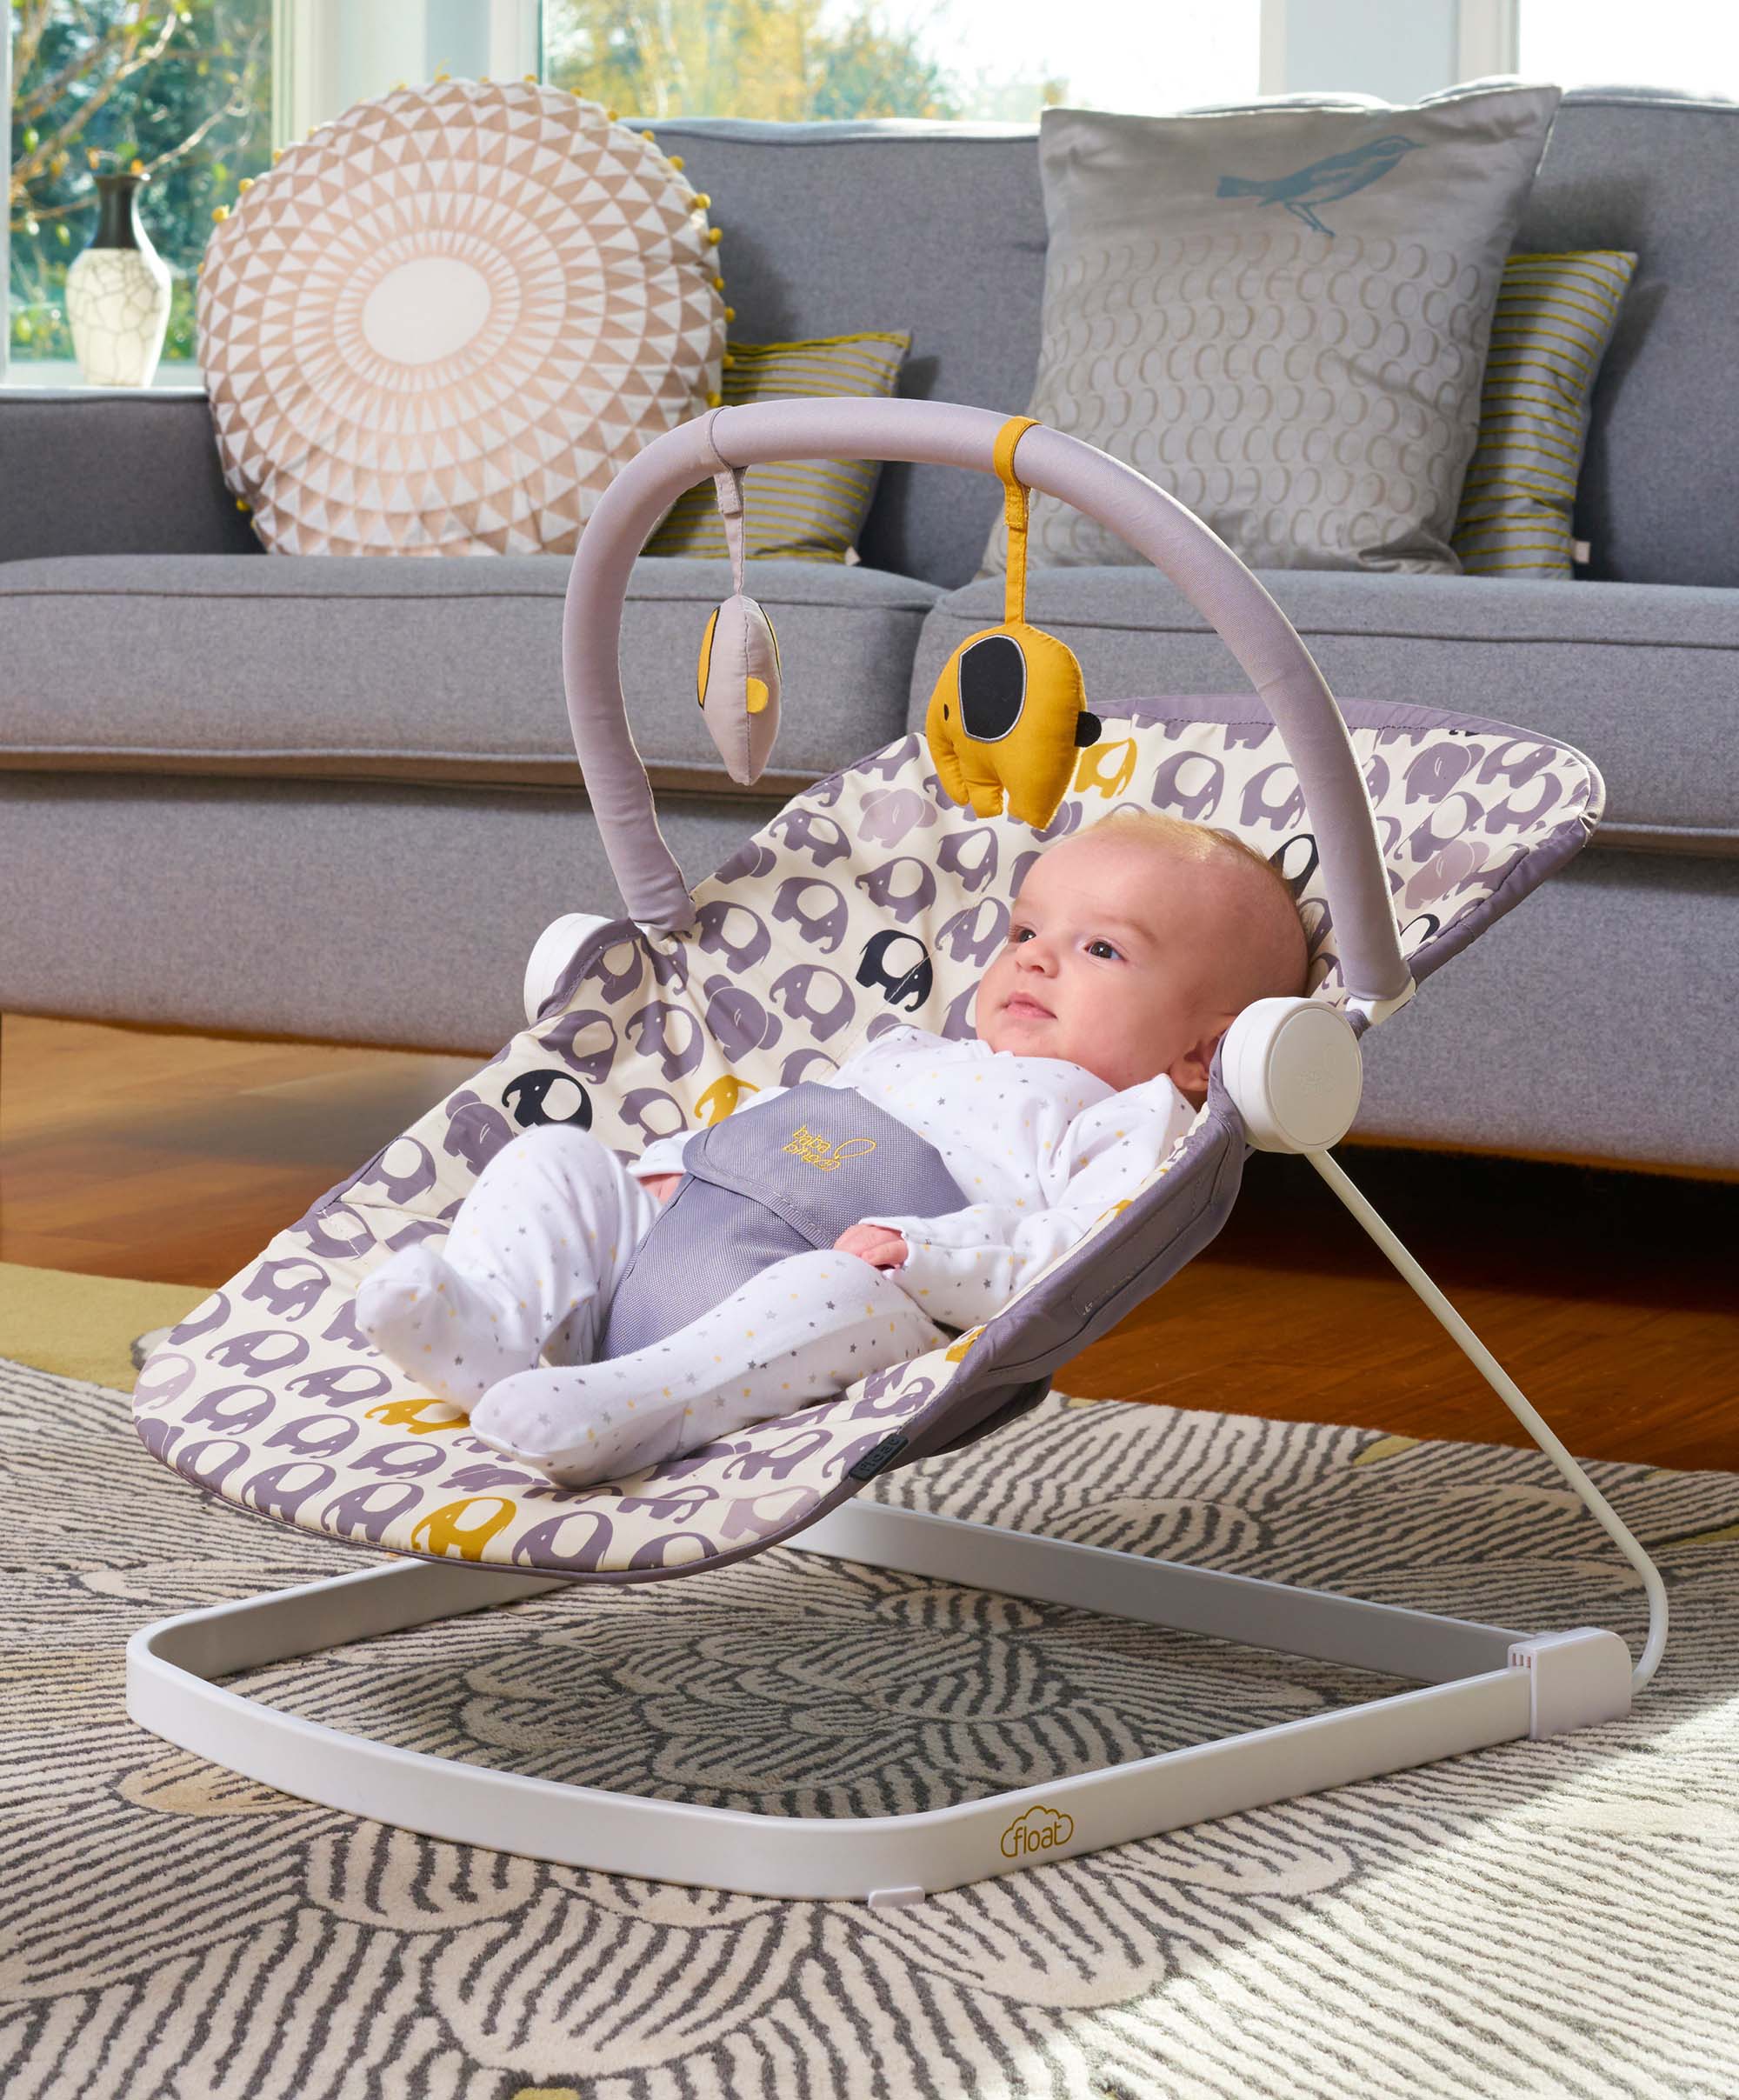 Bababing Float Baby Bouncer Chair - Ellie Elephant